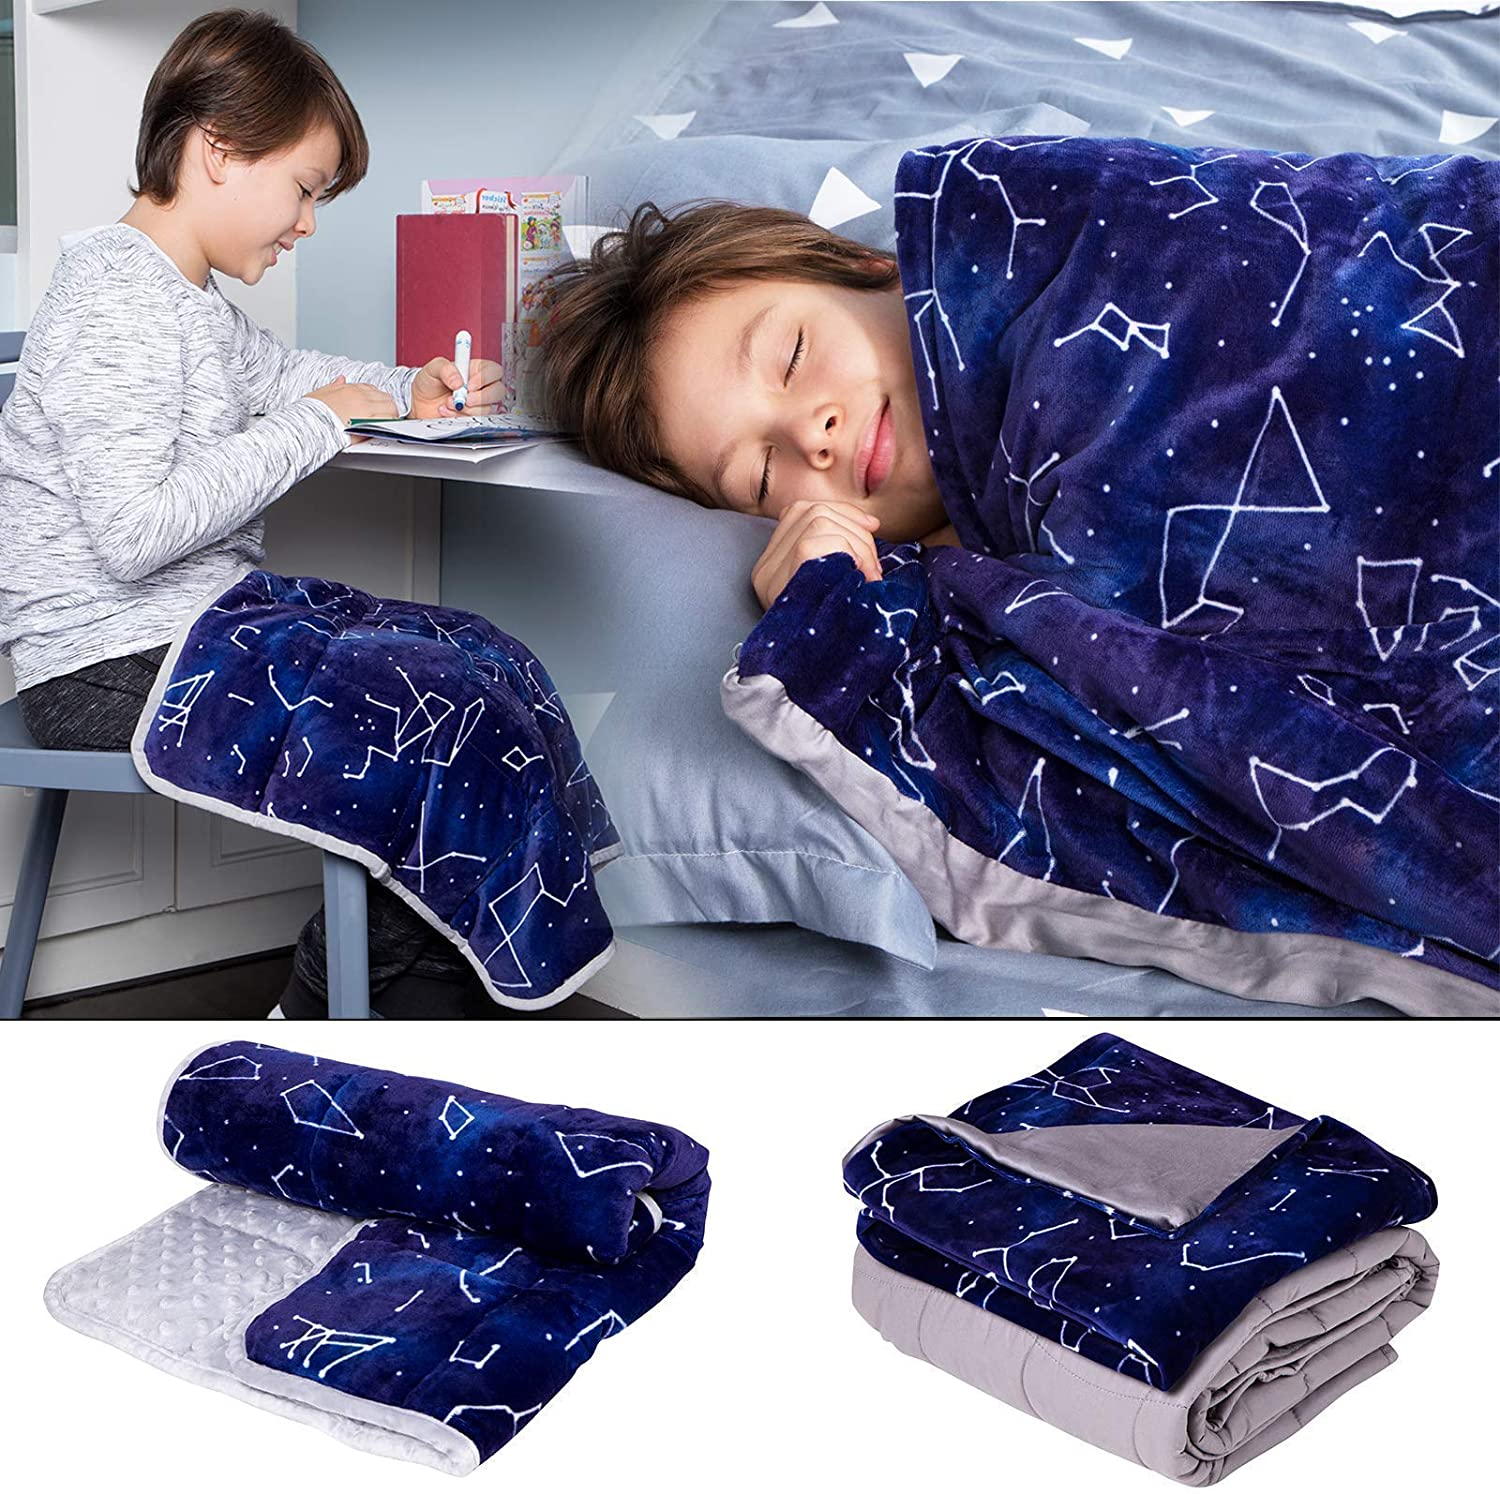 Florensi 5 lbs Weighted Blanket with Removable Bamboo Duvet Cover & 3 lbs Weighted Lap Pad Bundle- Sensory Blanket and Lap Pad Blue Constellations for Kid Baby Toddler Teenager, Washable Cover - Florensi